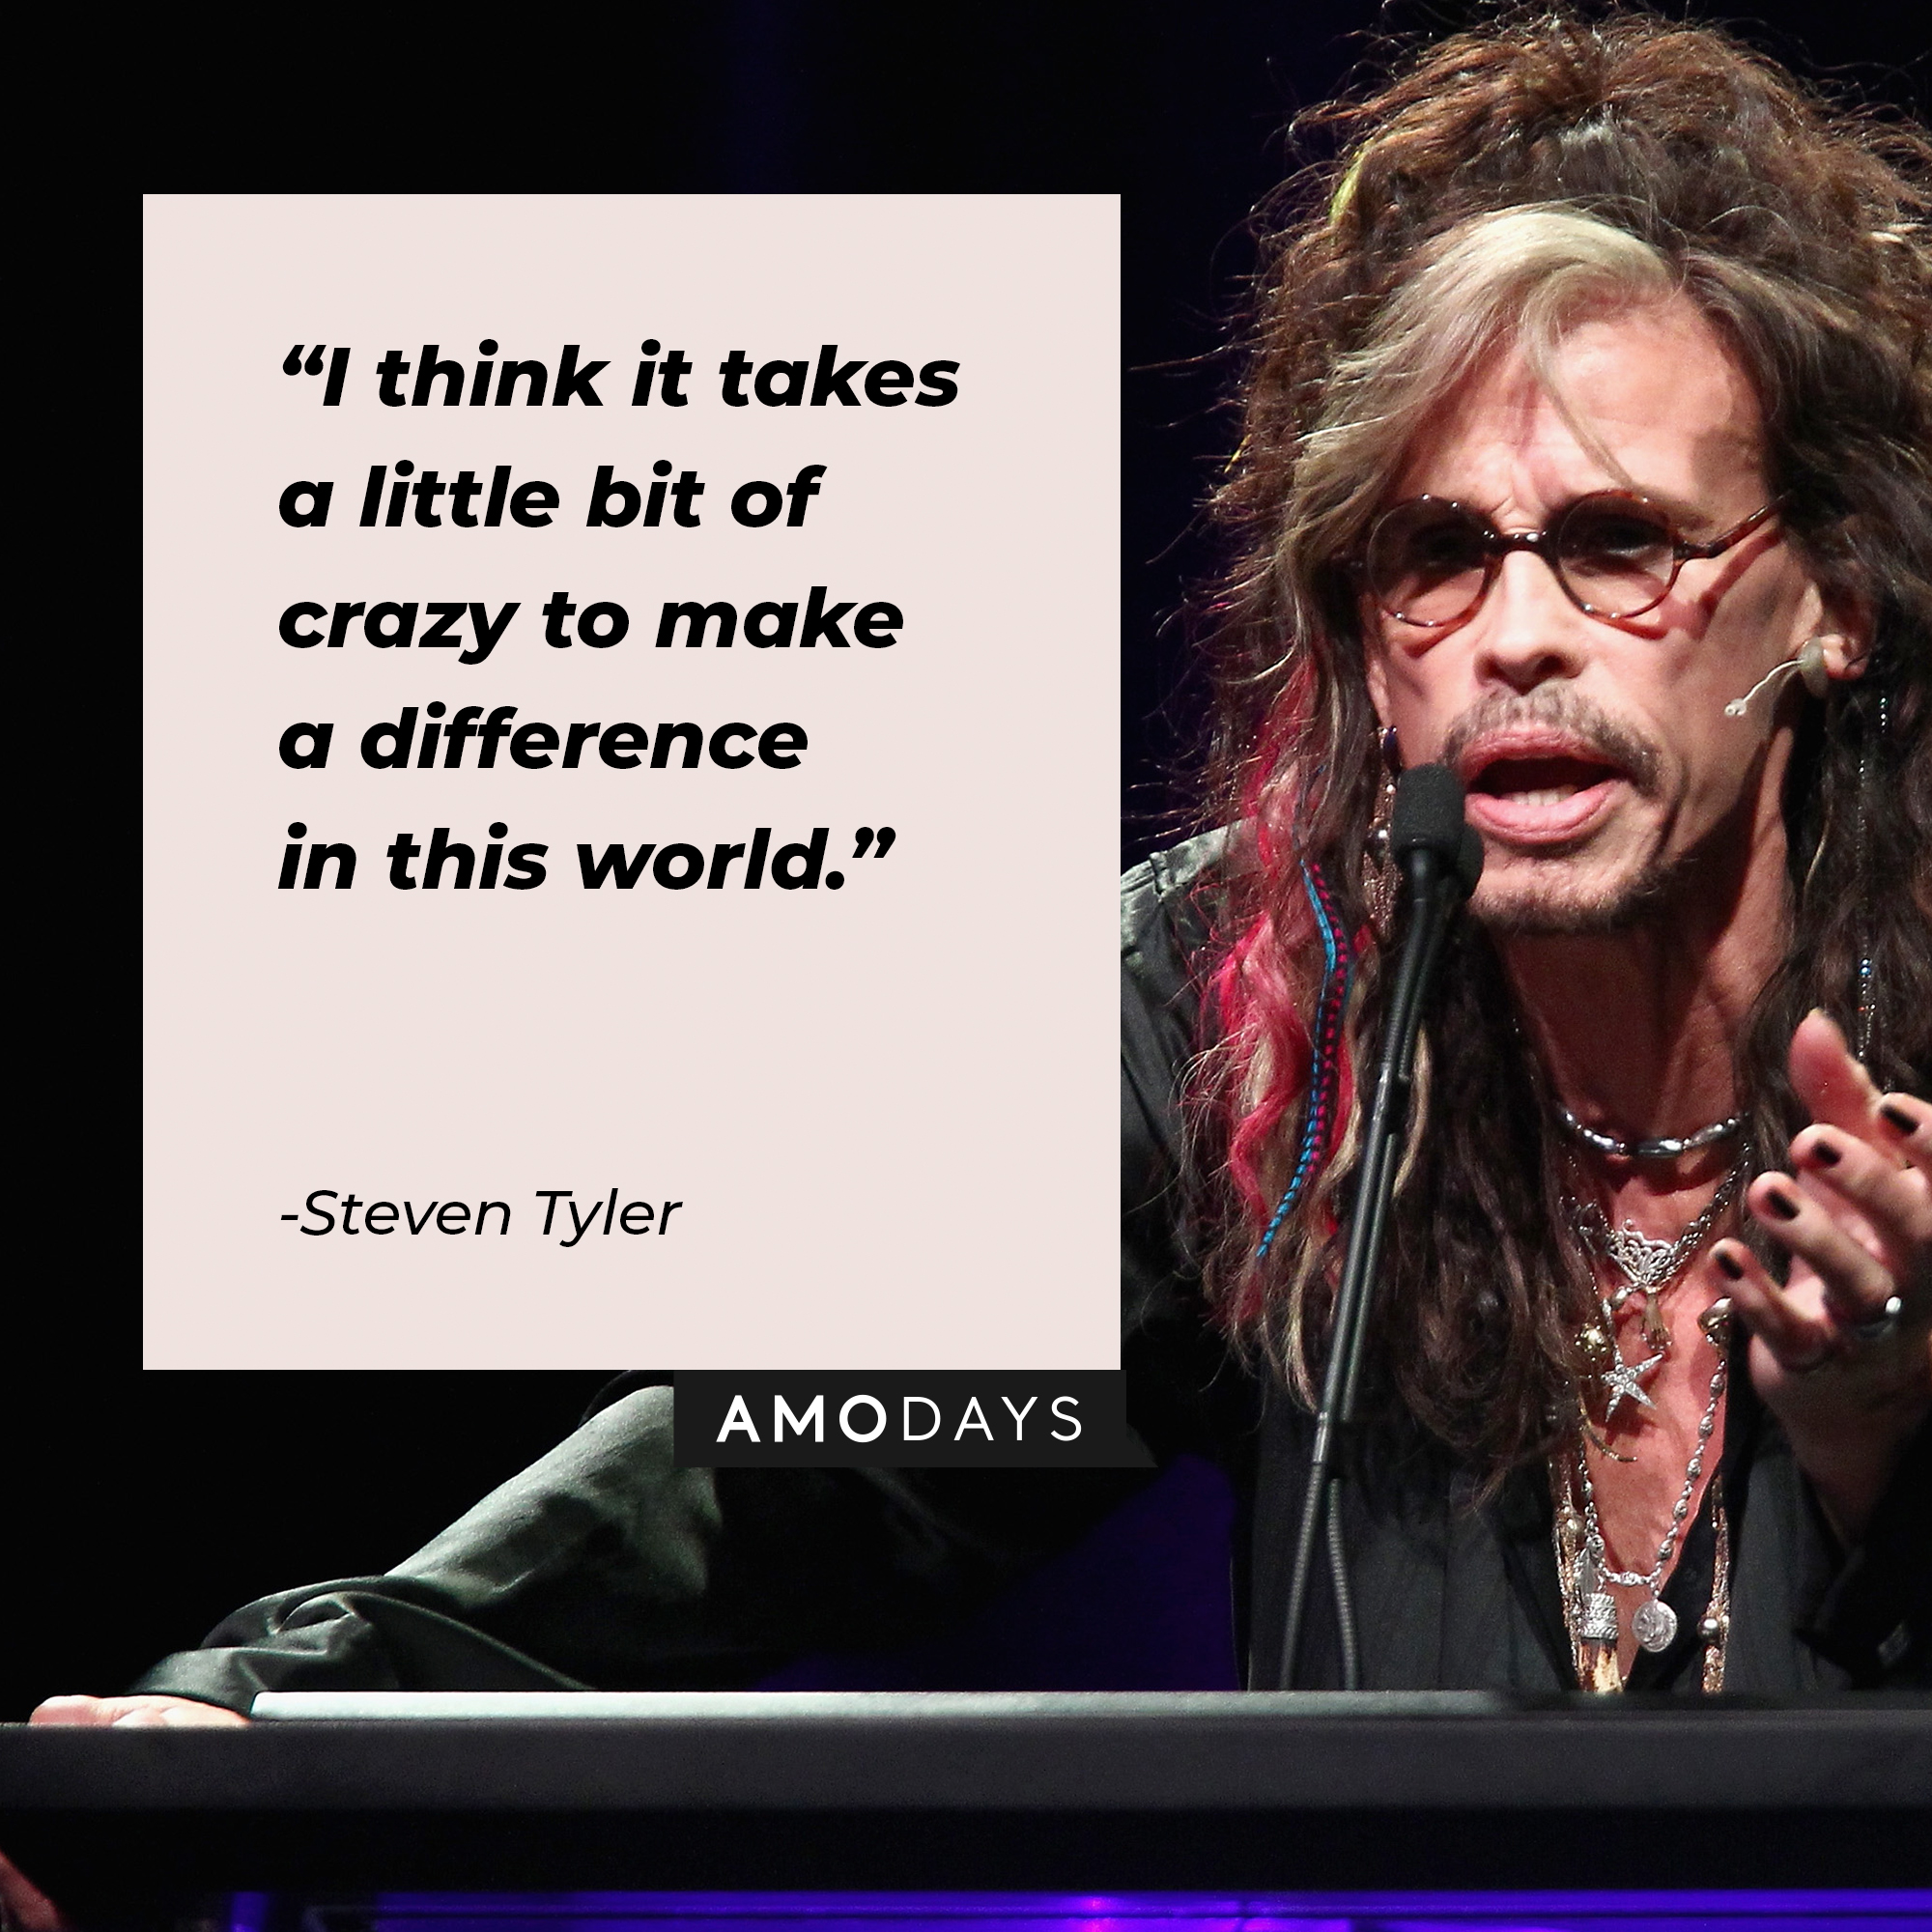 Steven Tyler's quote: "I think it takes a little bit of crazy to make a difference in this world." | Source: Getty Images